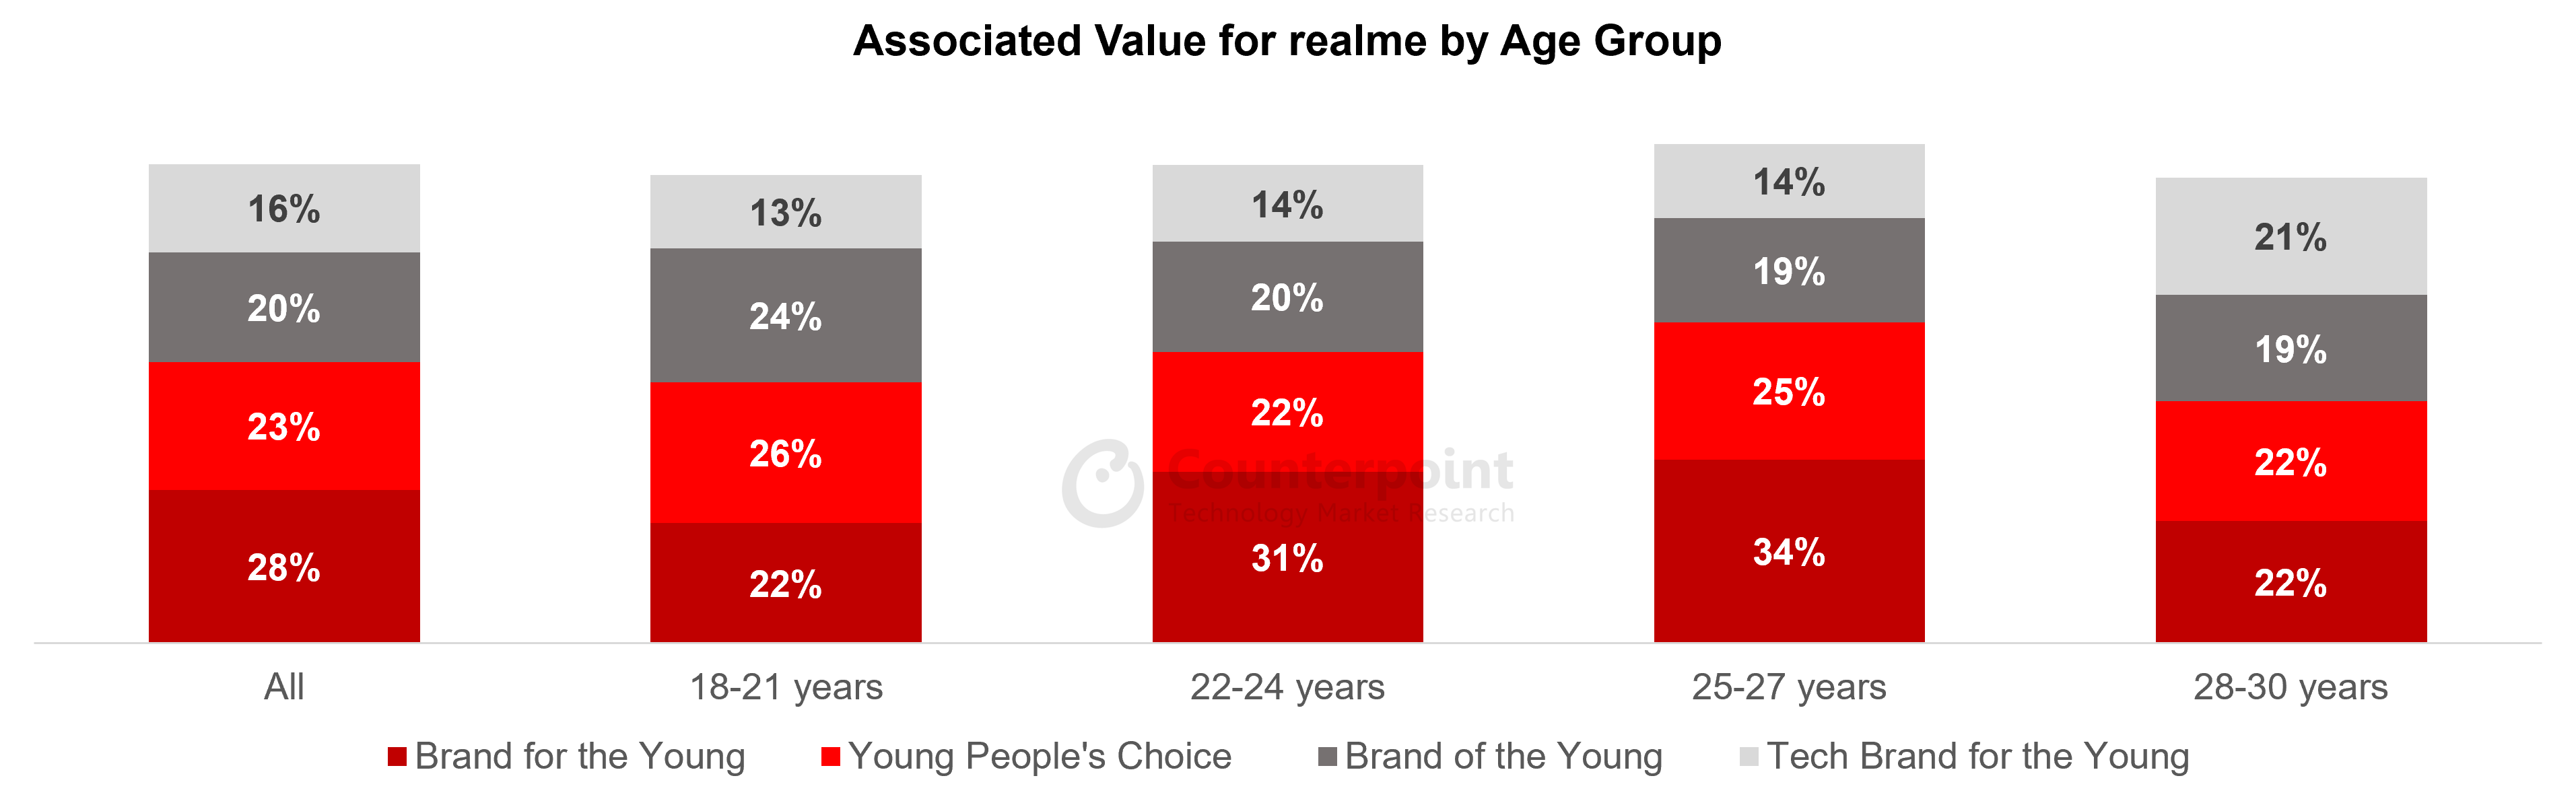 A chart showing the Associated Value for realme by Age Group